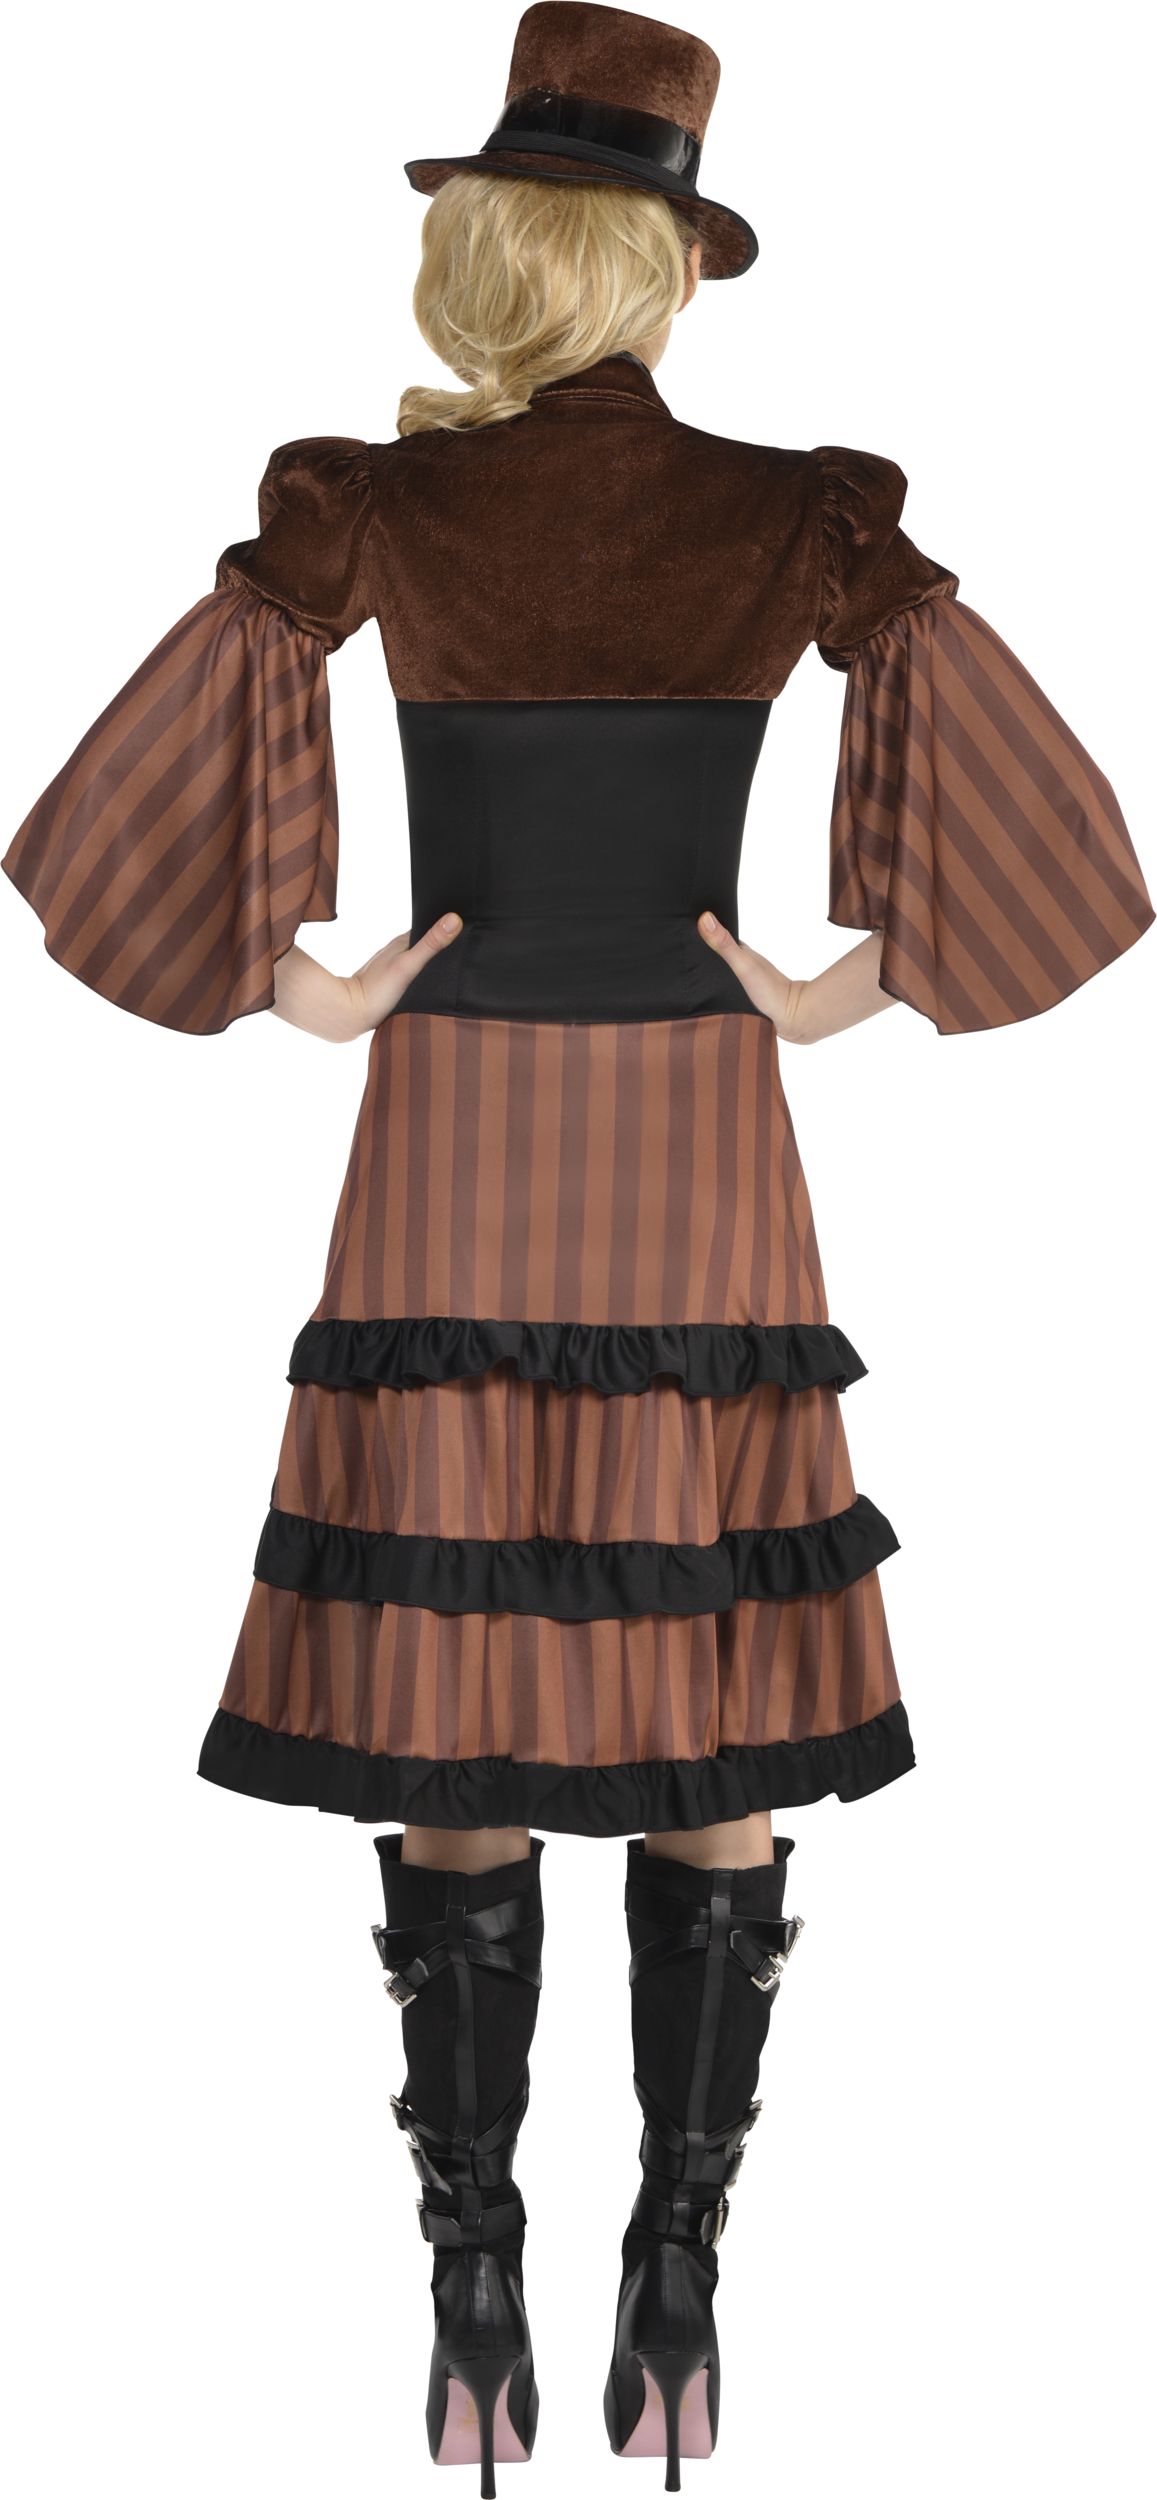 Steampunk or pirate dress: Steampunk under-bust brown and black